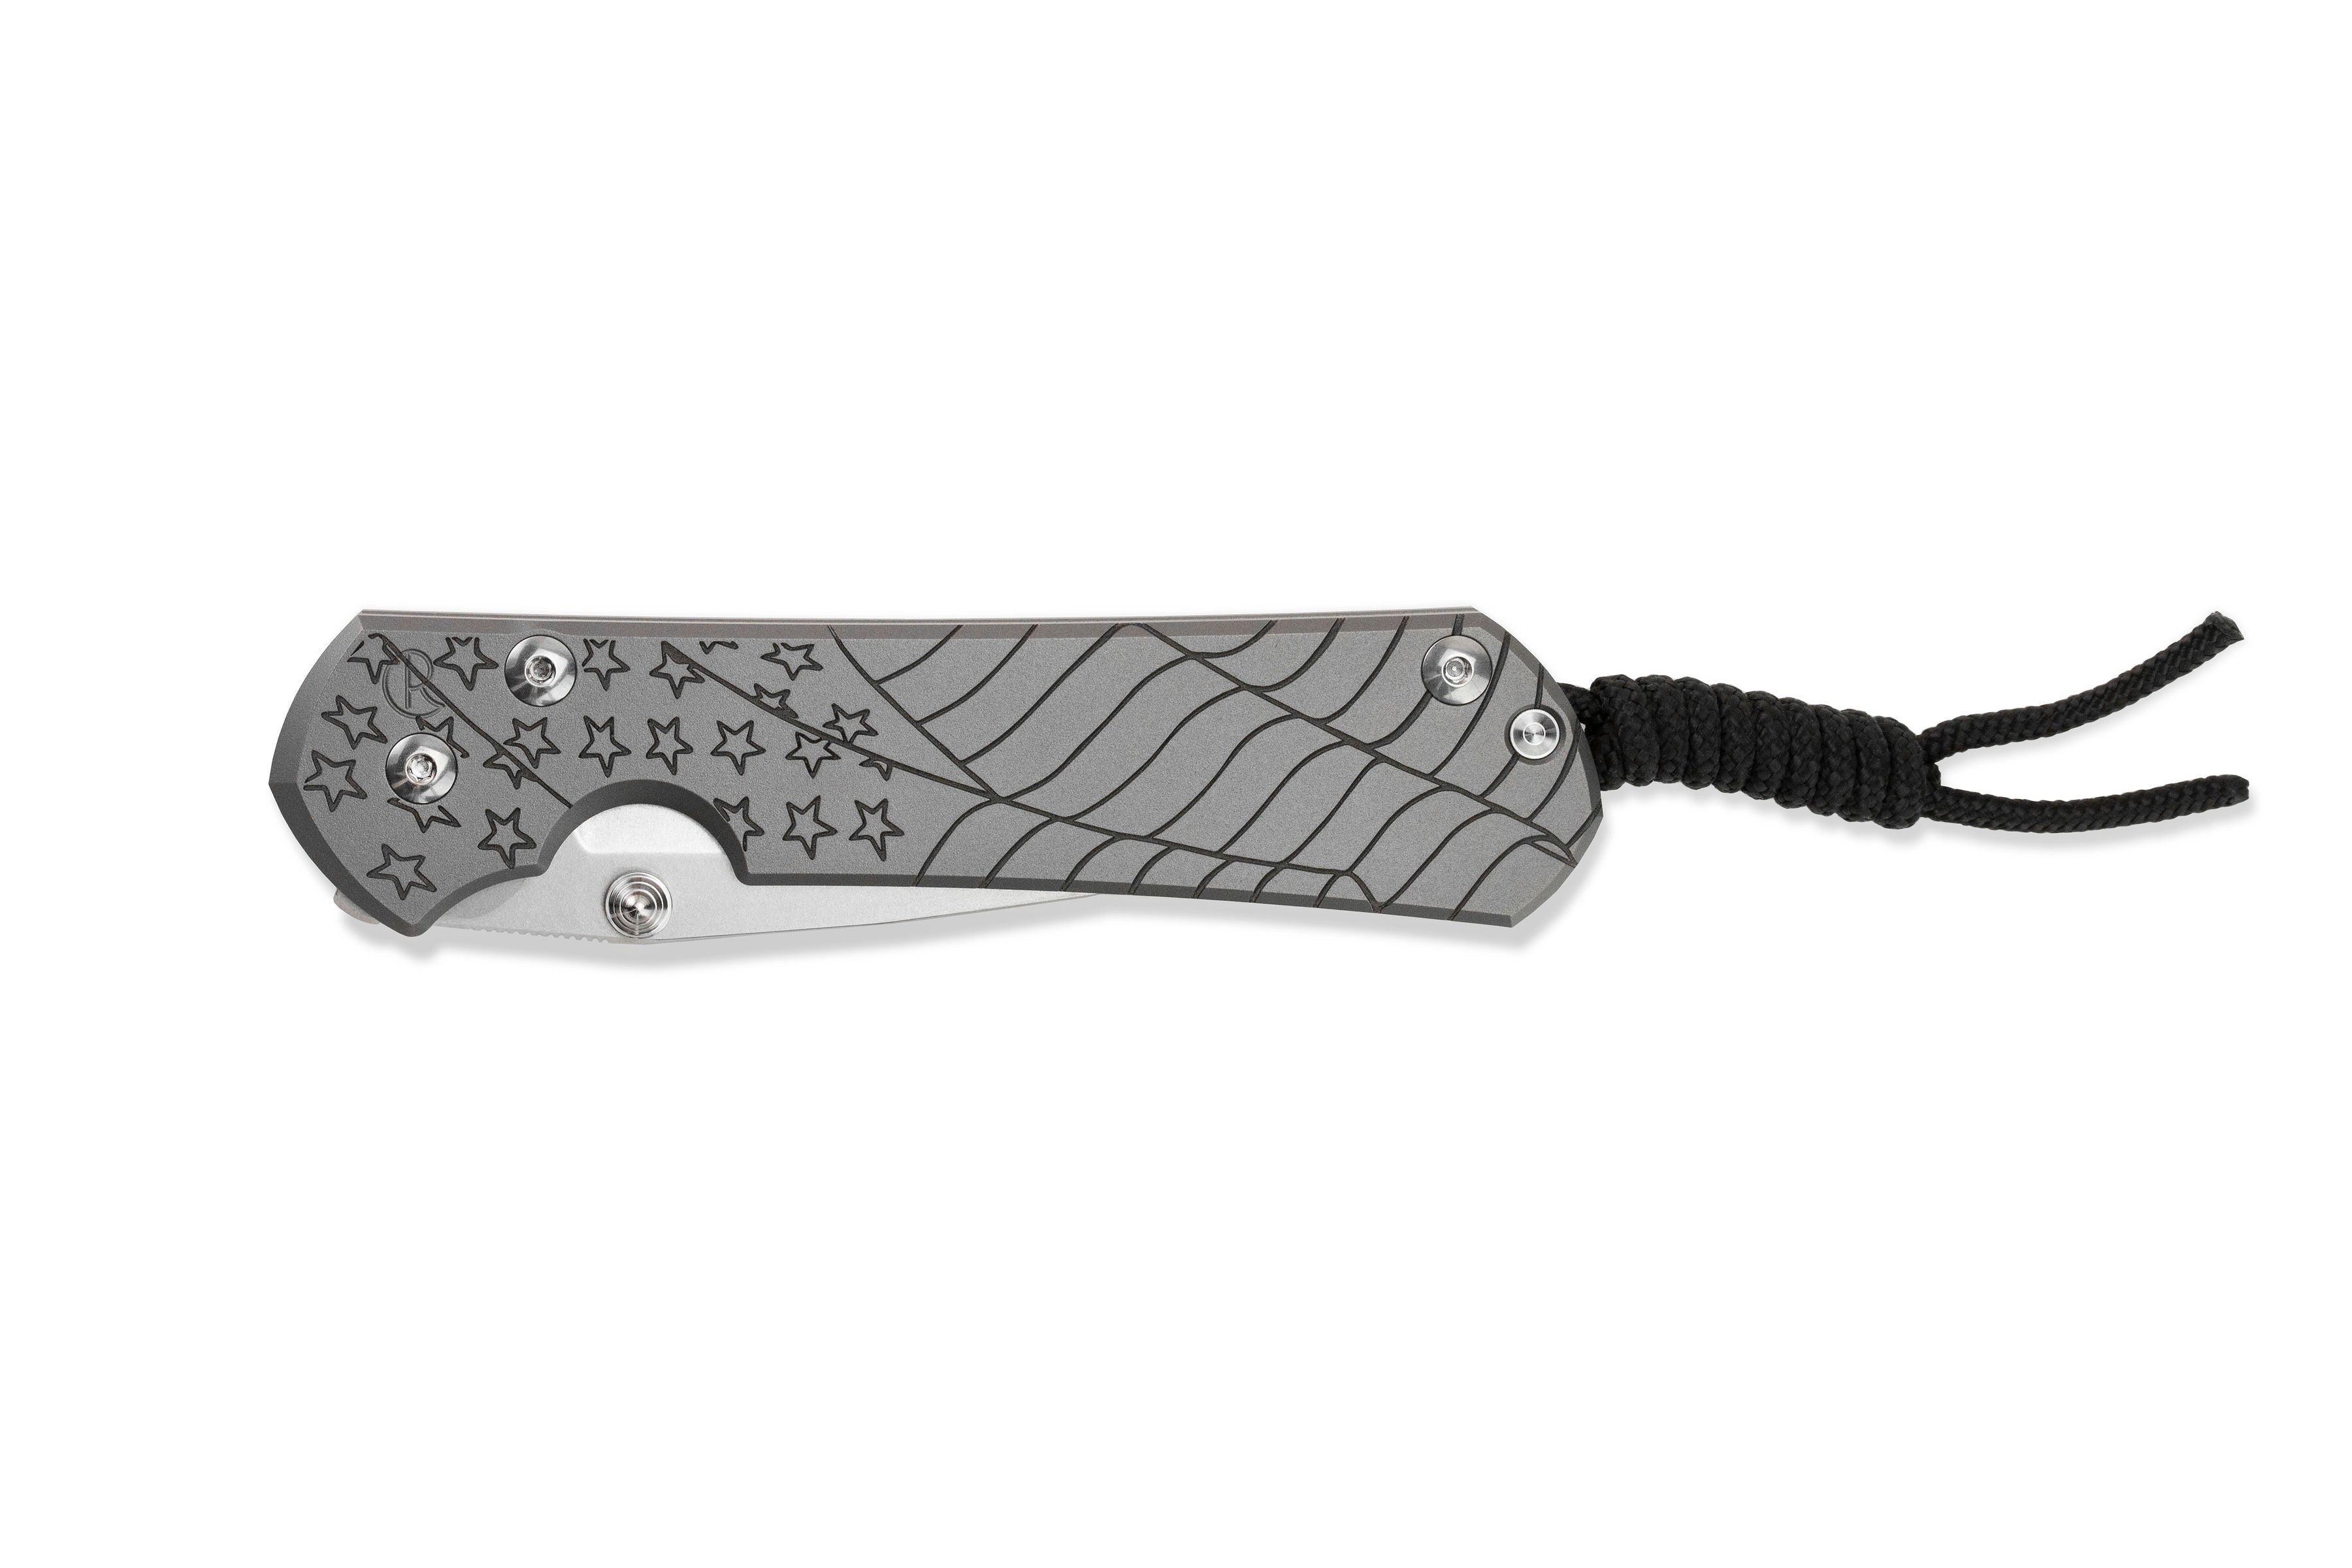 Chris Reeve - Small Sebenza 31 - 2022 CGG "Forever Flag" - Drop Point - Glass Blasted - S31-1690